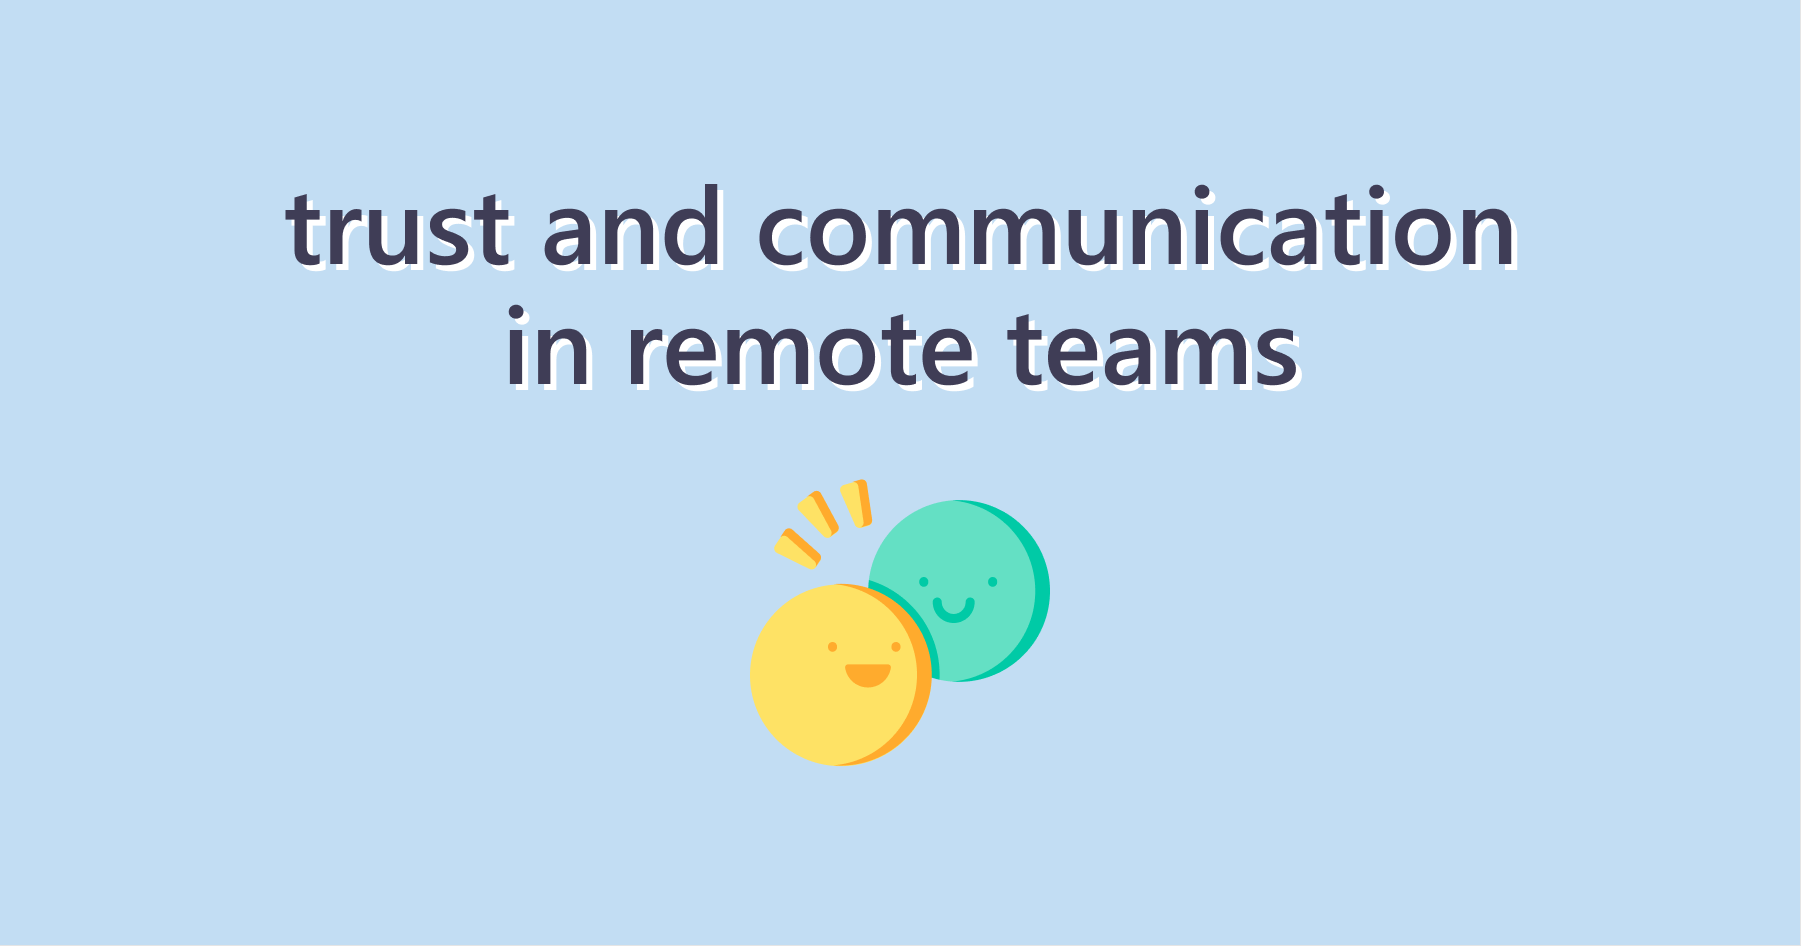 Building Trust and Communication in Remote Teams